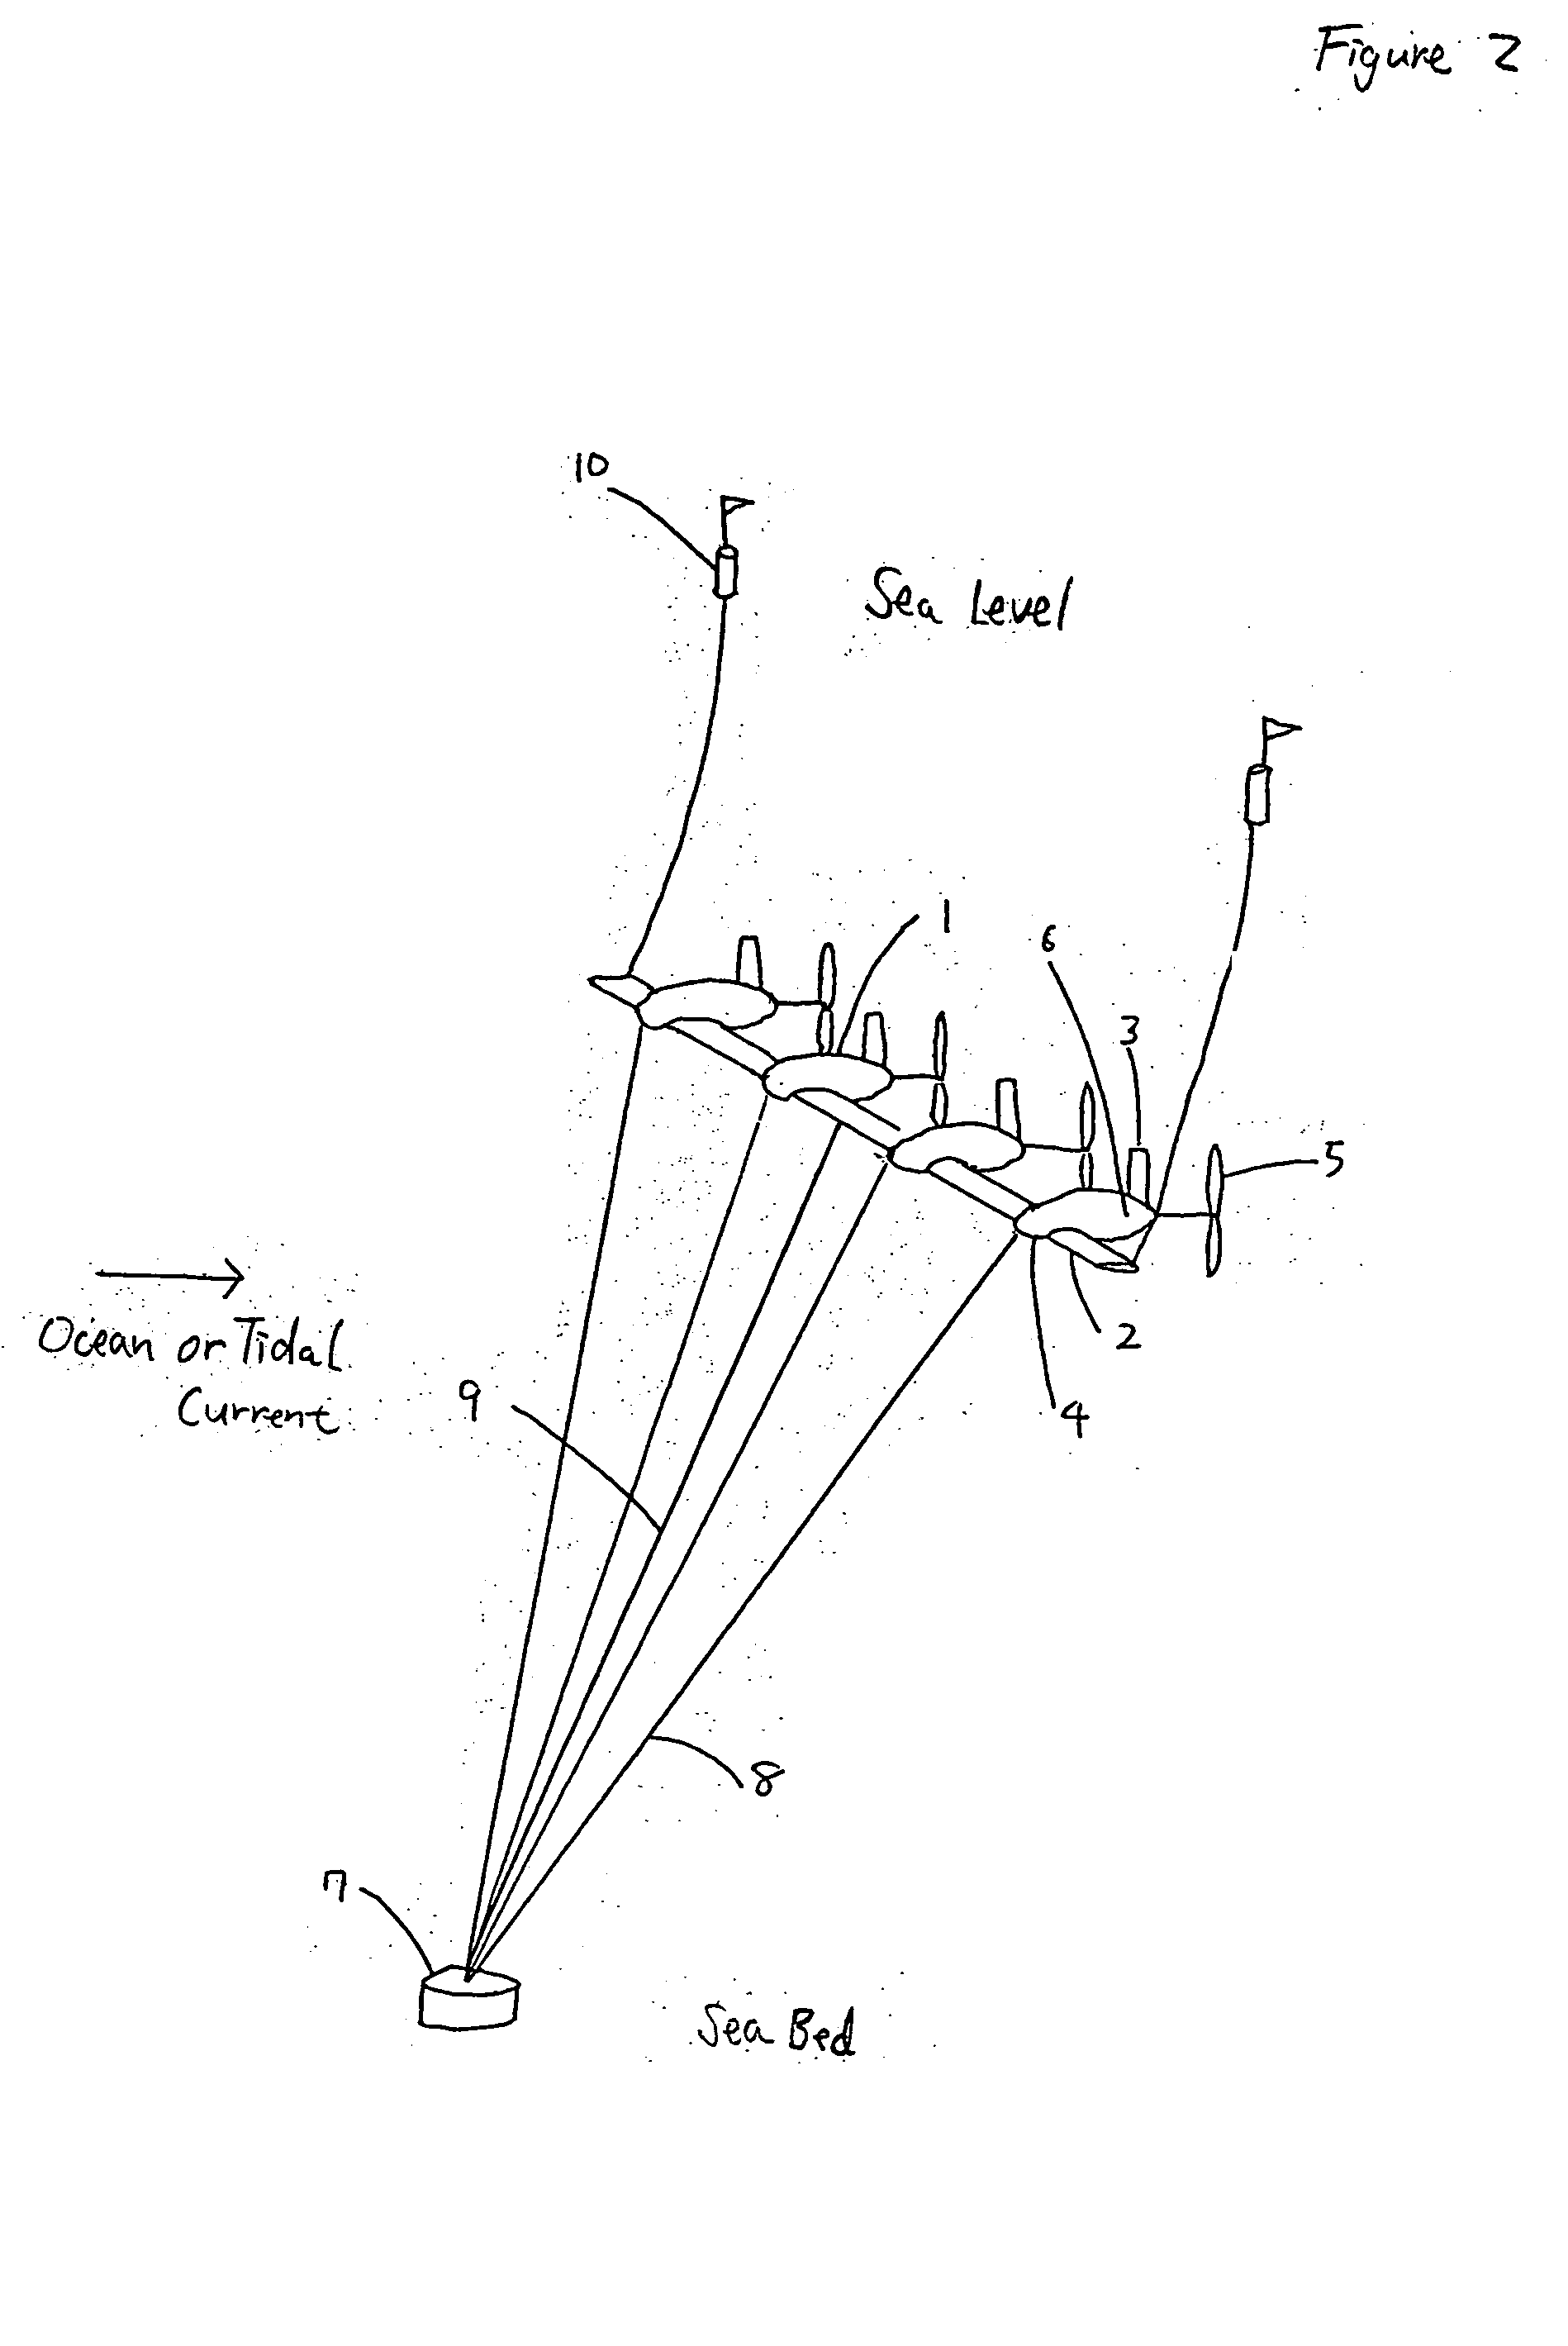 Method comprising electricity transmission, hydrogen productin and its transportation, from ocean and/or tidal current power generation apparatus, and control and moorage of ocean and/or tidal current power generation apparatus